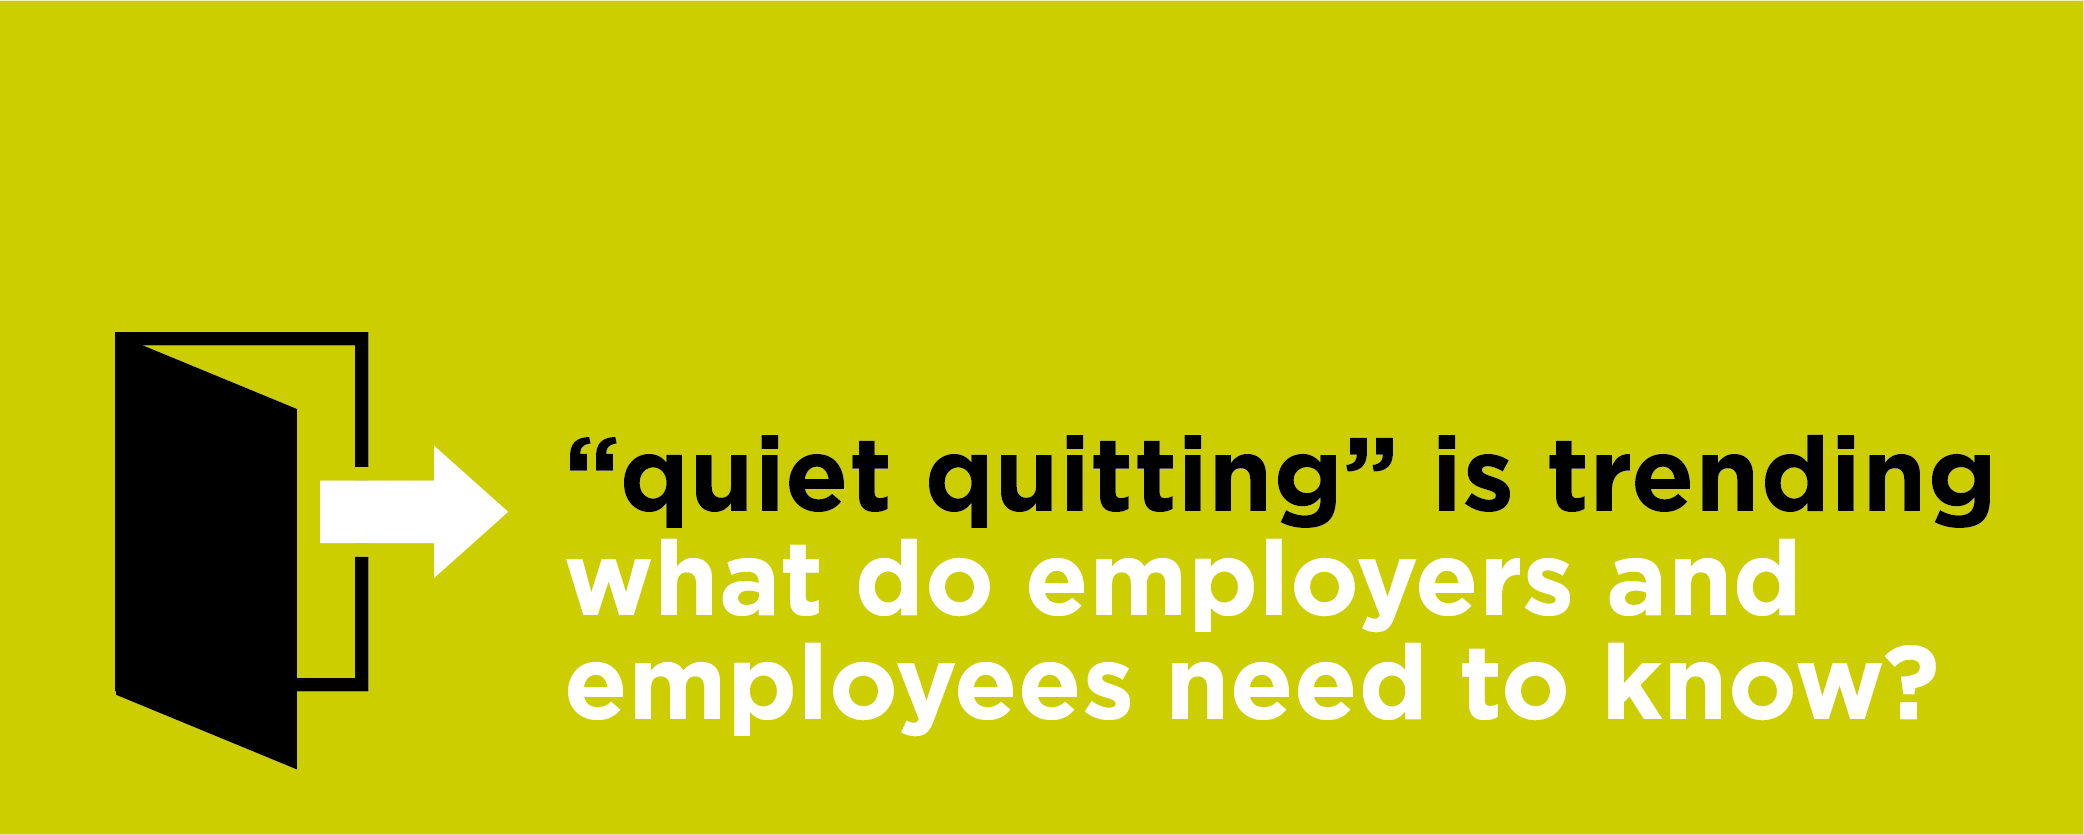 "Quiet quitting"- what do employers and employees need to know?